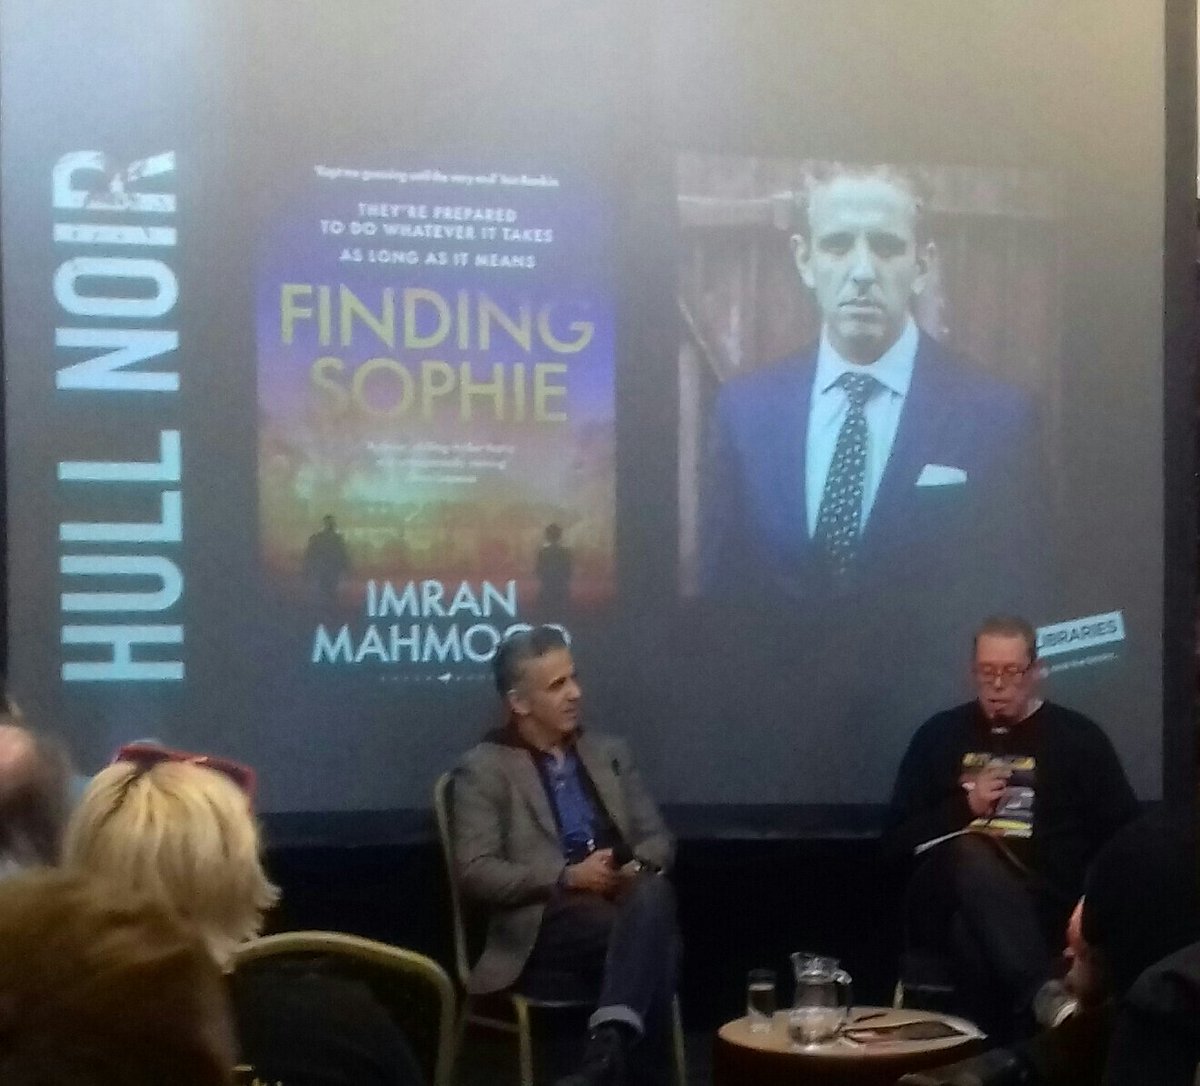 Underway at @hull_libraries @HullNoir with @NickQuantrill talking to @imranmahmood777. #FindingSophie.